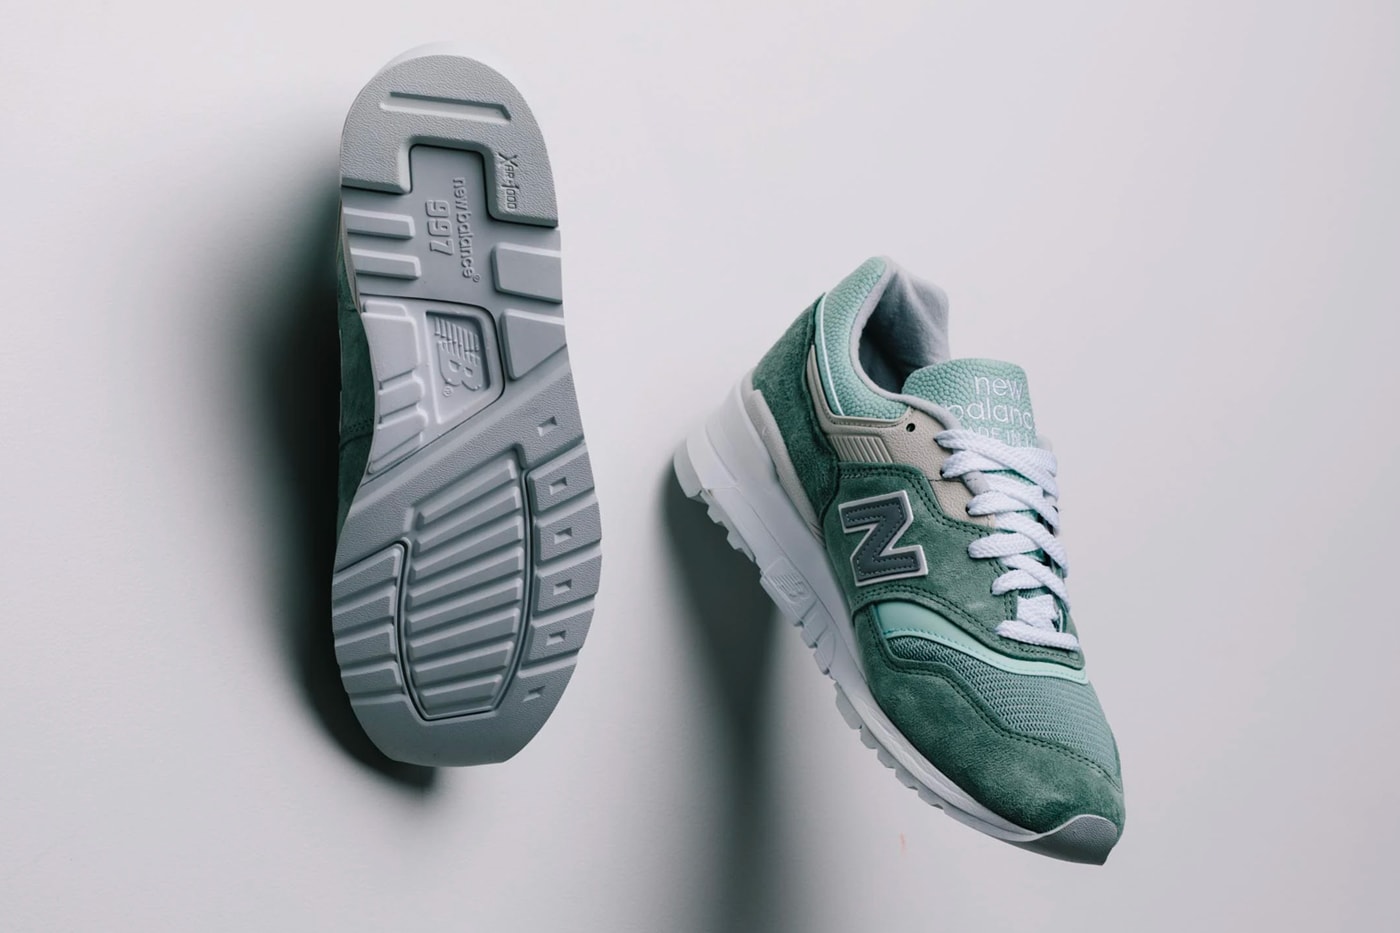 New Balance M997SOB Mint White sneakers runners trainers footwear shoes kicks spring summer 2020 collection capsule Fearlessly Independent Since 1906 Arch Support Company